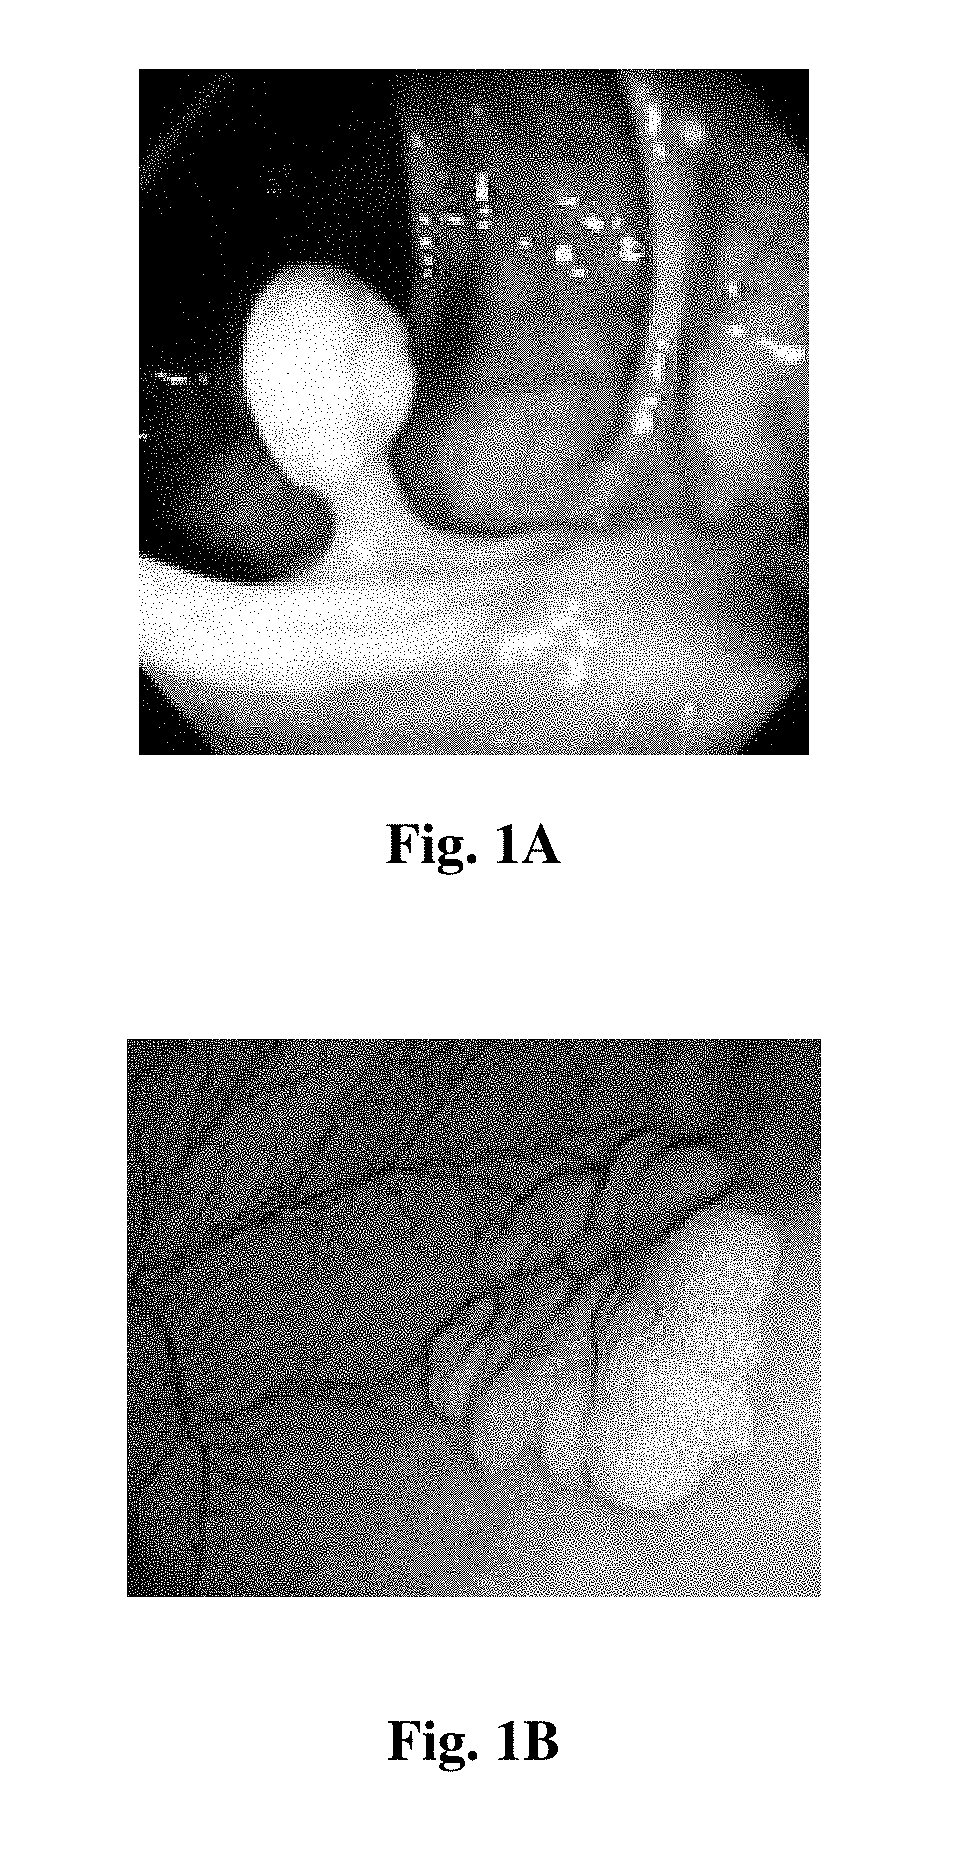 A system and method for detection of suspicious tissue regions in an endoscopic procedure